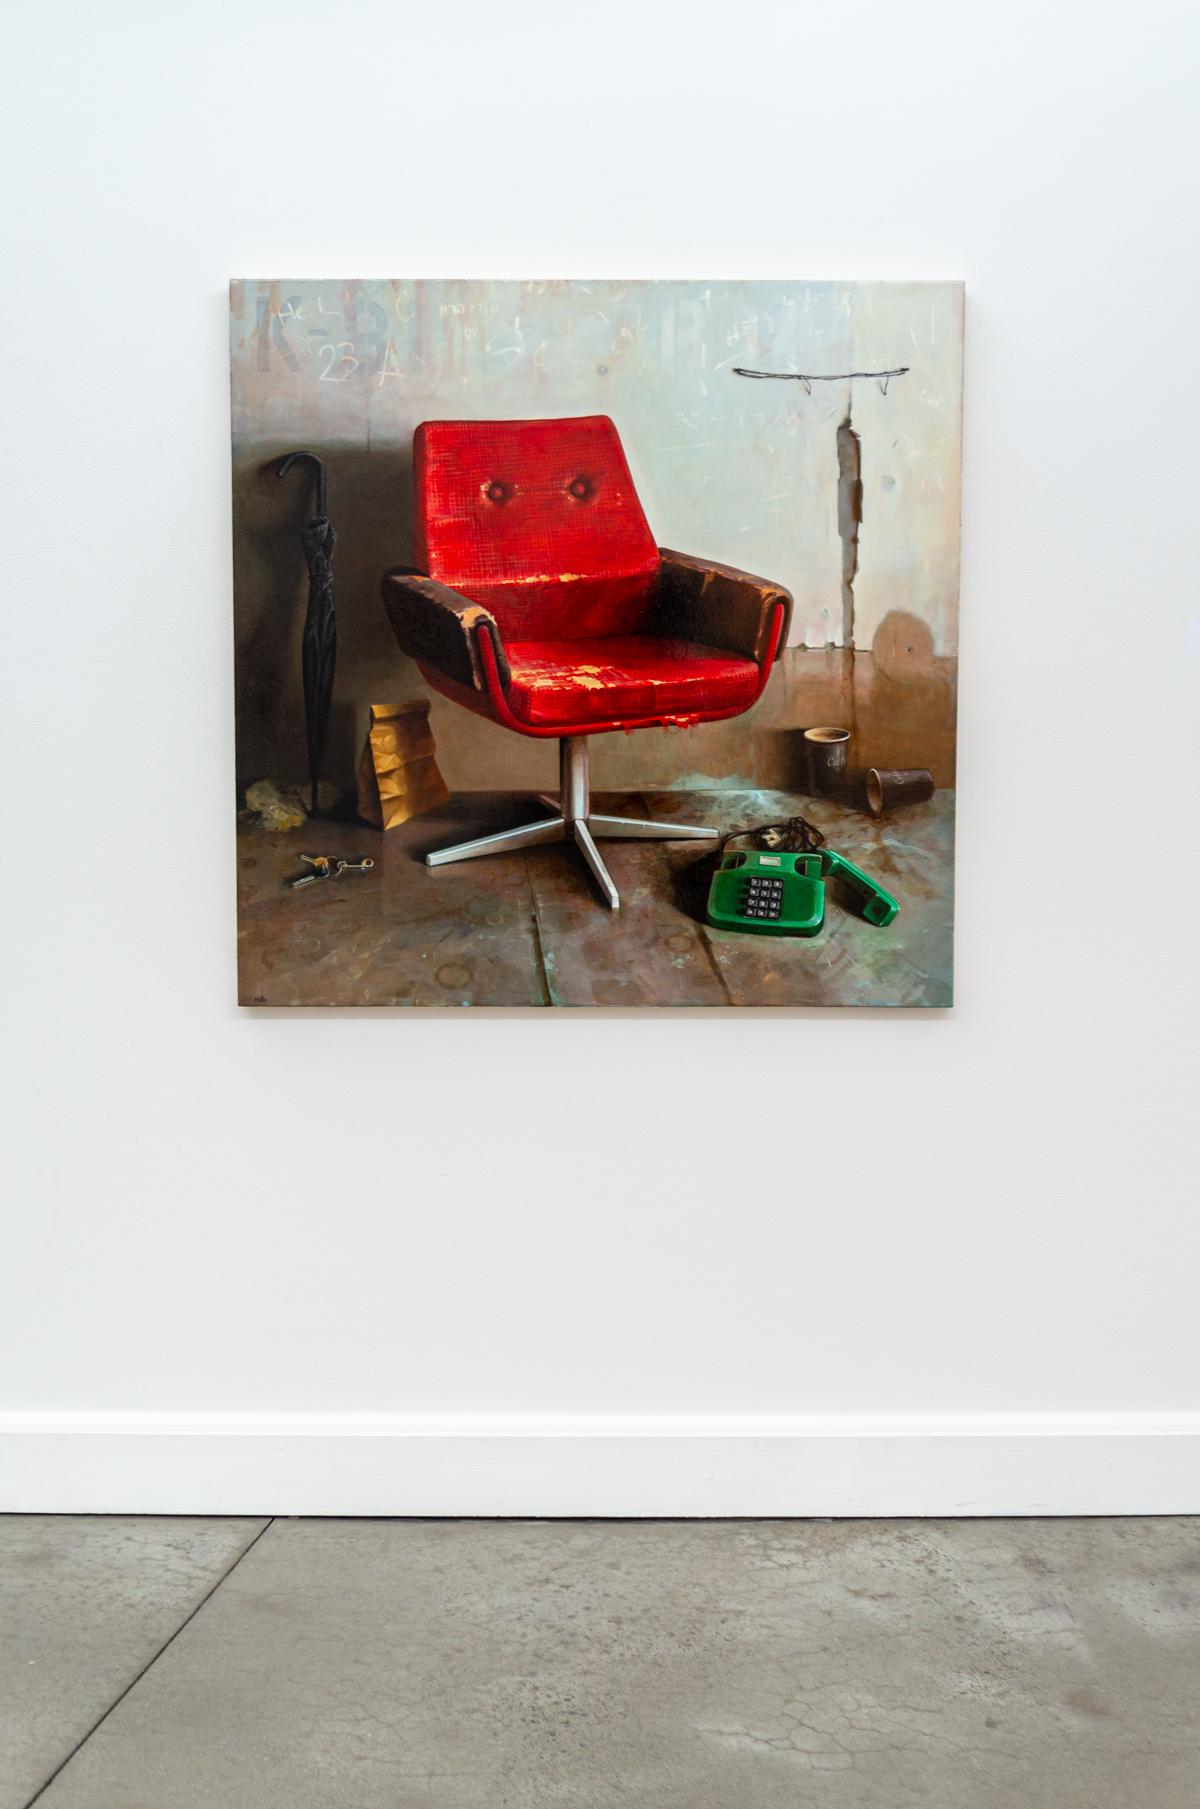 Red Chair and Green Phone - realist, interior, Ukrainian, Israeli, oil on canvas - Painting by Dmitry Yuzefovich